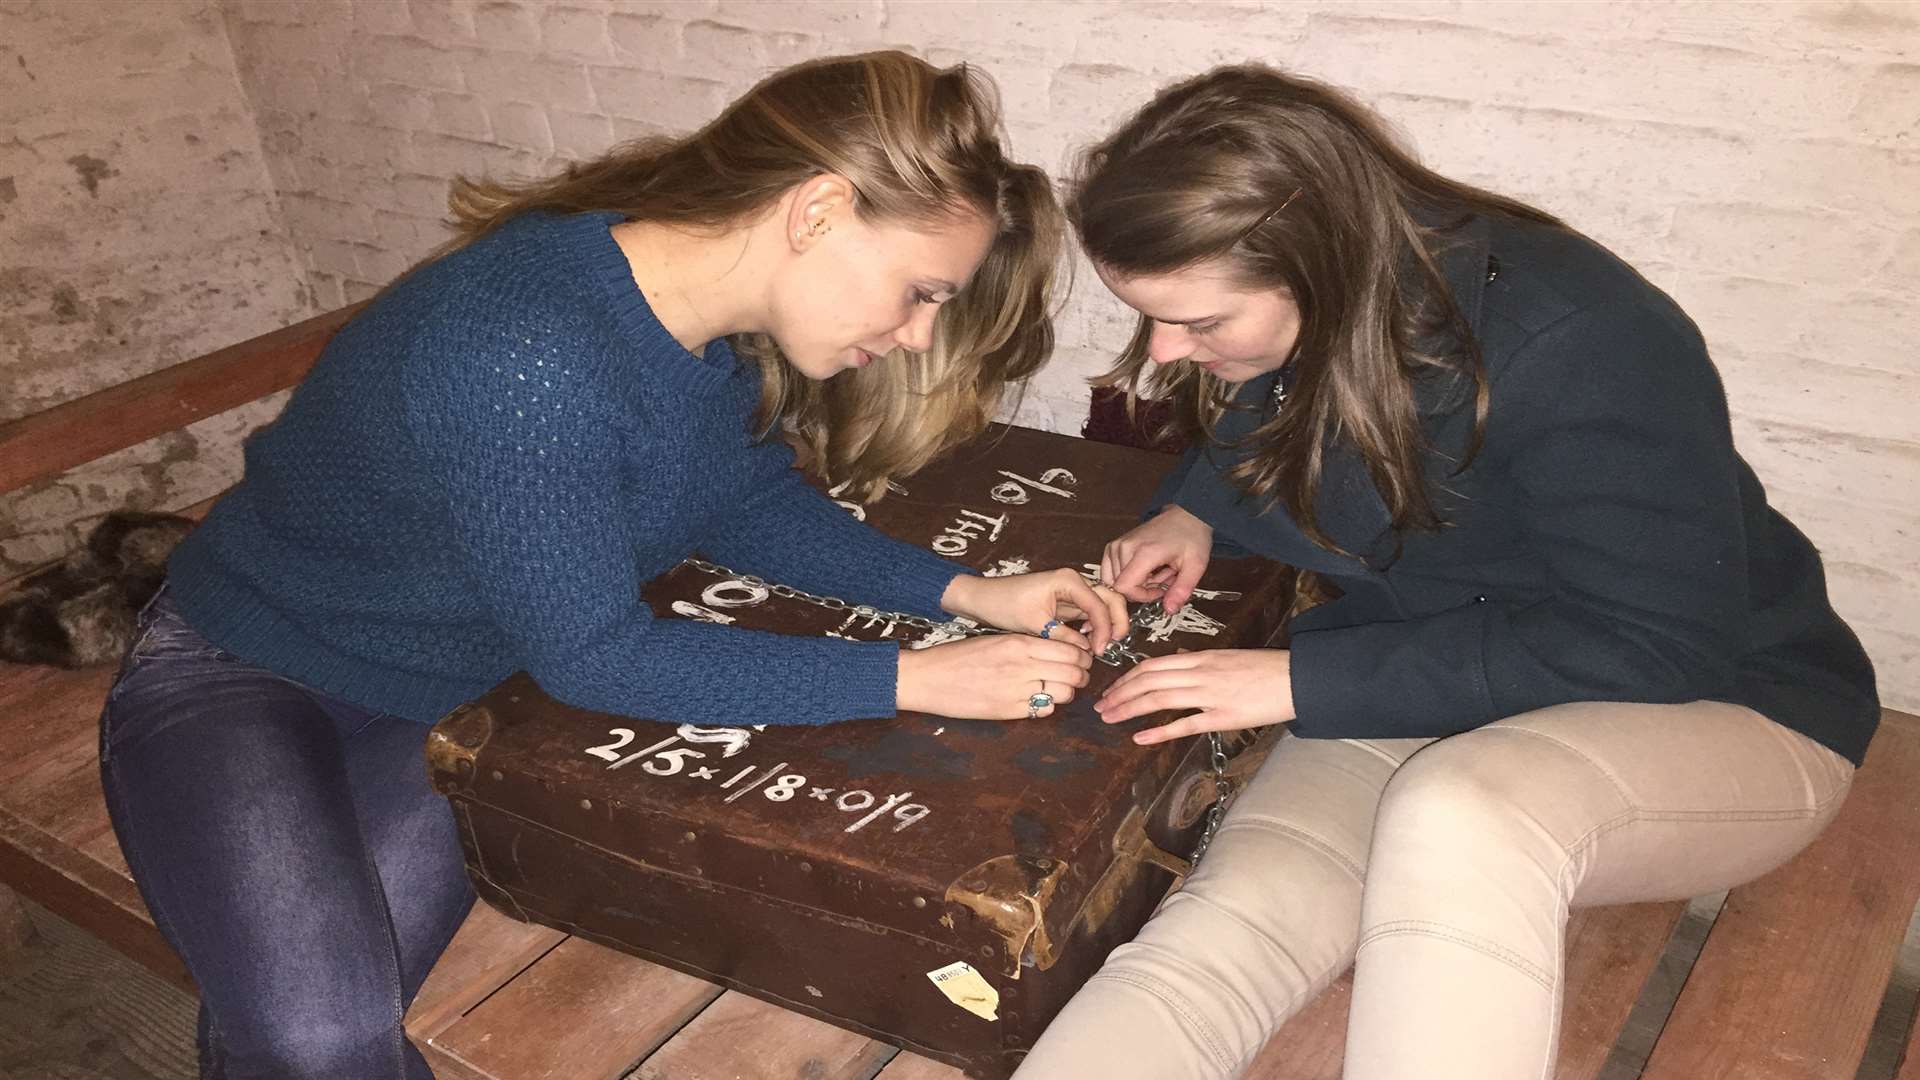 Reporters Lizzie Massey and Clare Freeman pitched their wits against an unseen enemy, but failed the Escape Plan LIVE challenge